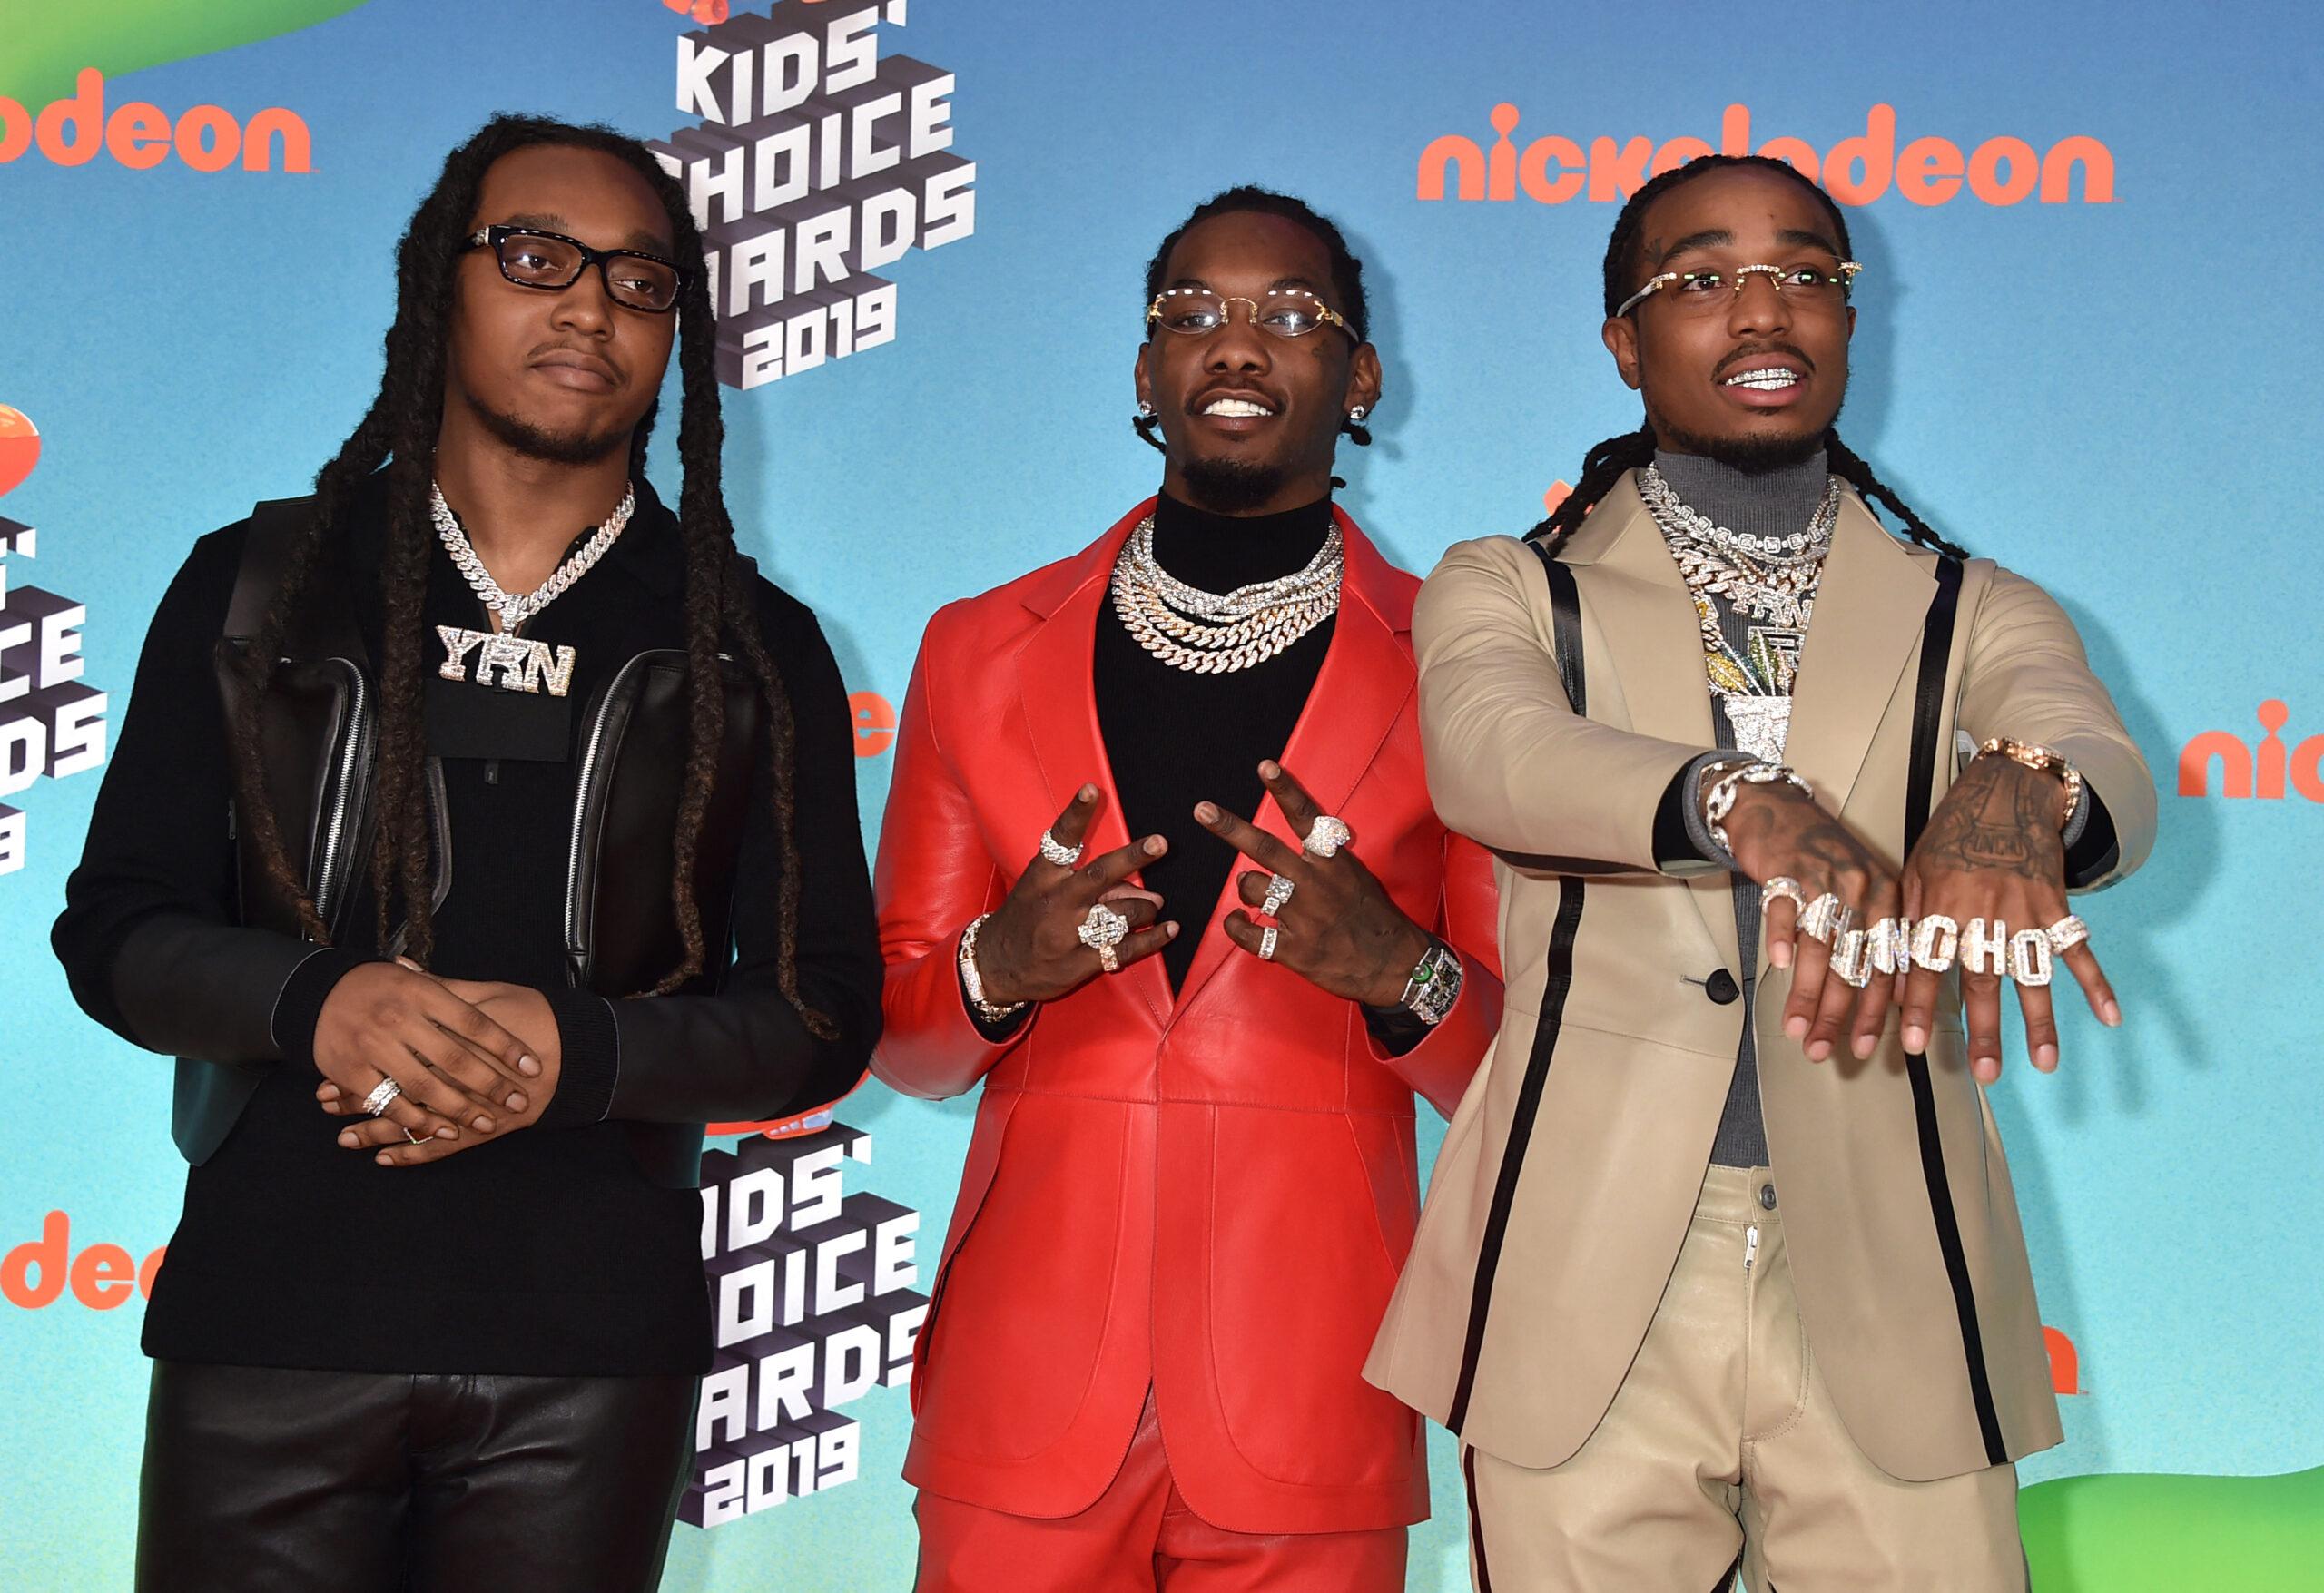 Takeoff, Quavo, Offset from Migos at Nickelodeon's Kids' Choice Awards 2019